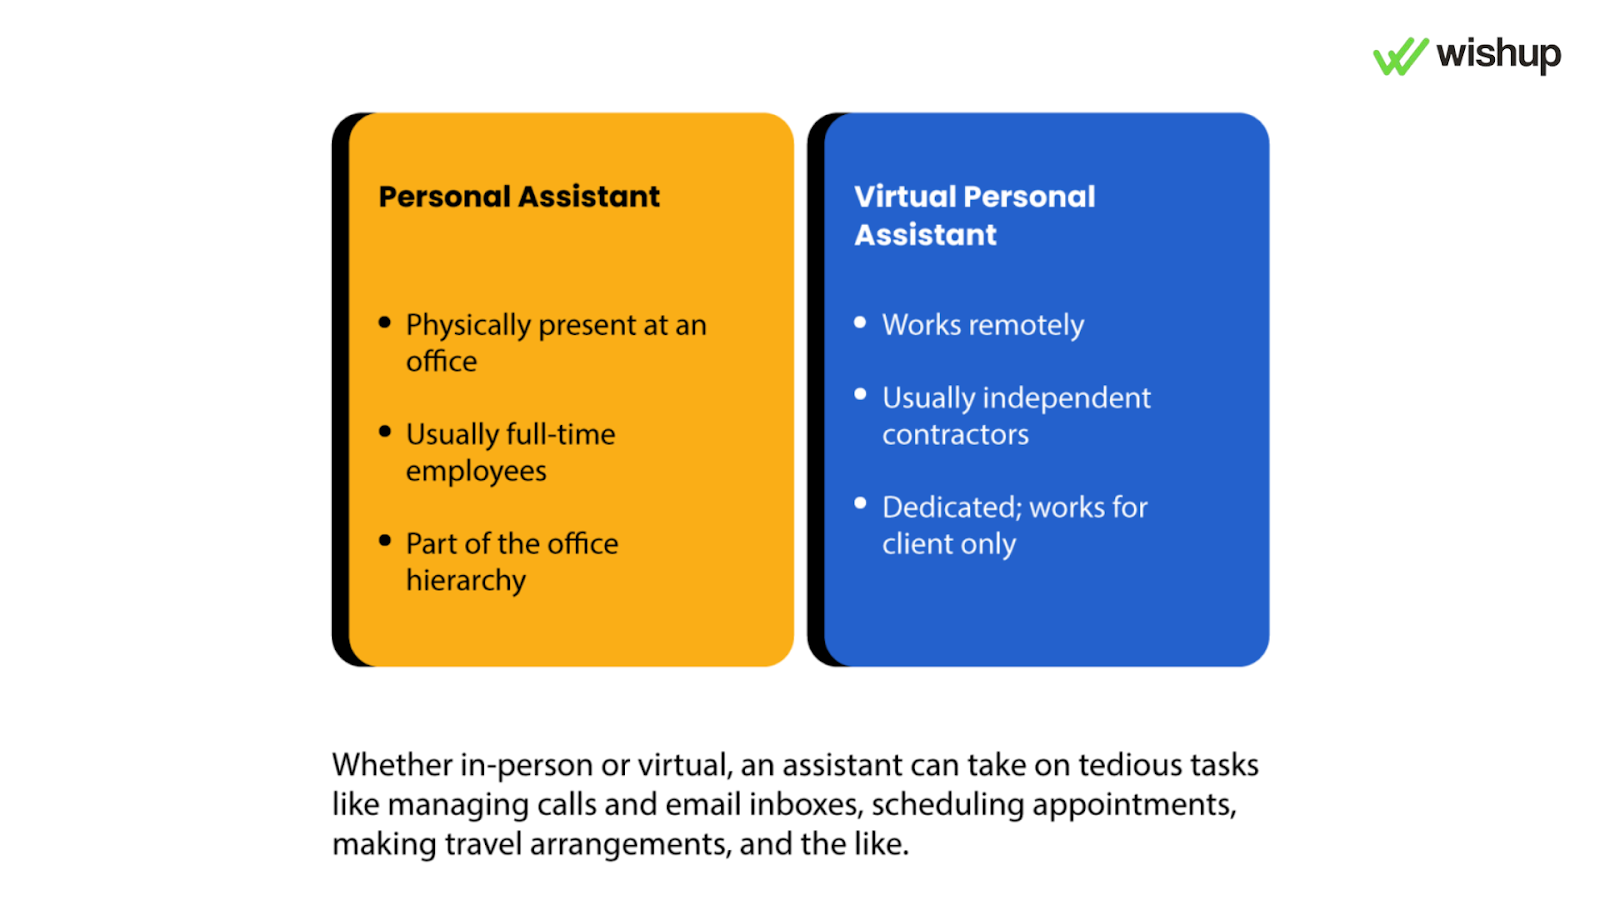 How is Personal Assistant different from Virtual Assistant